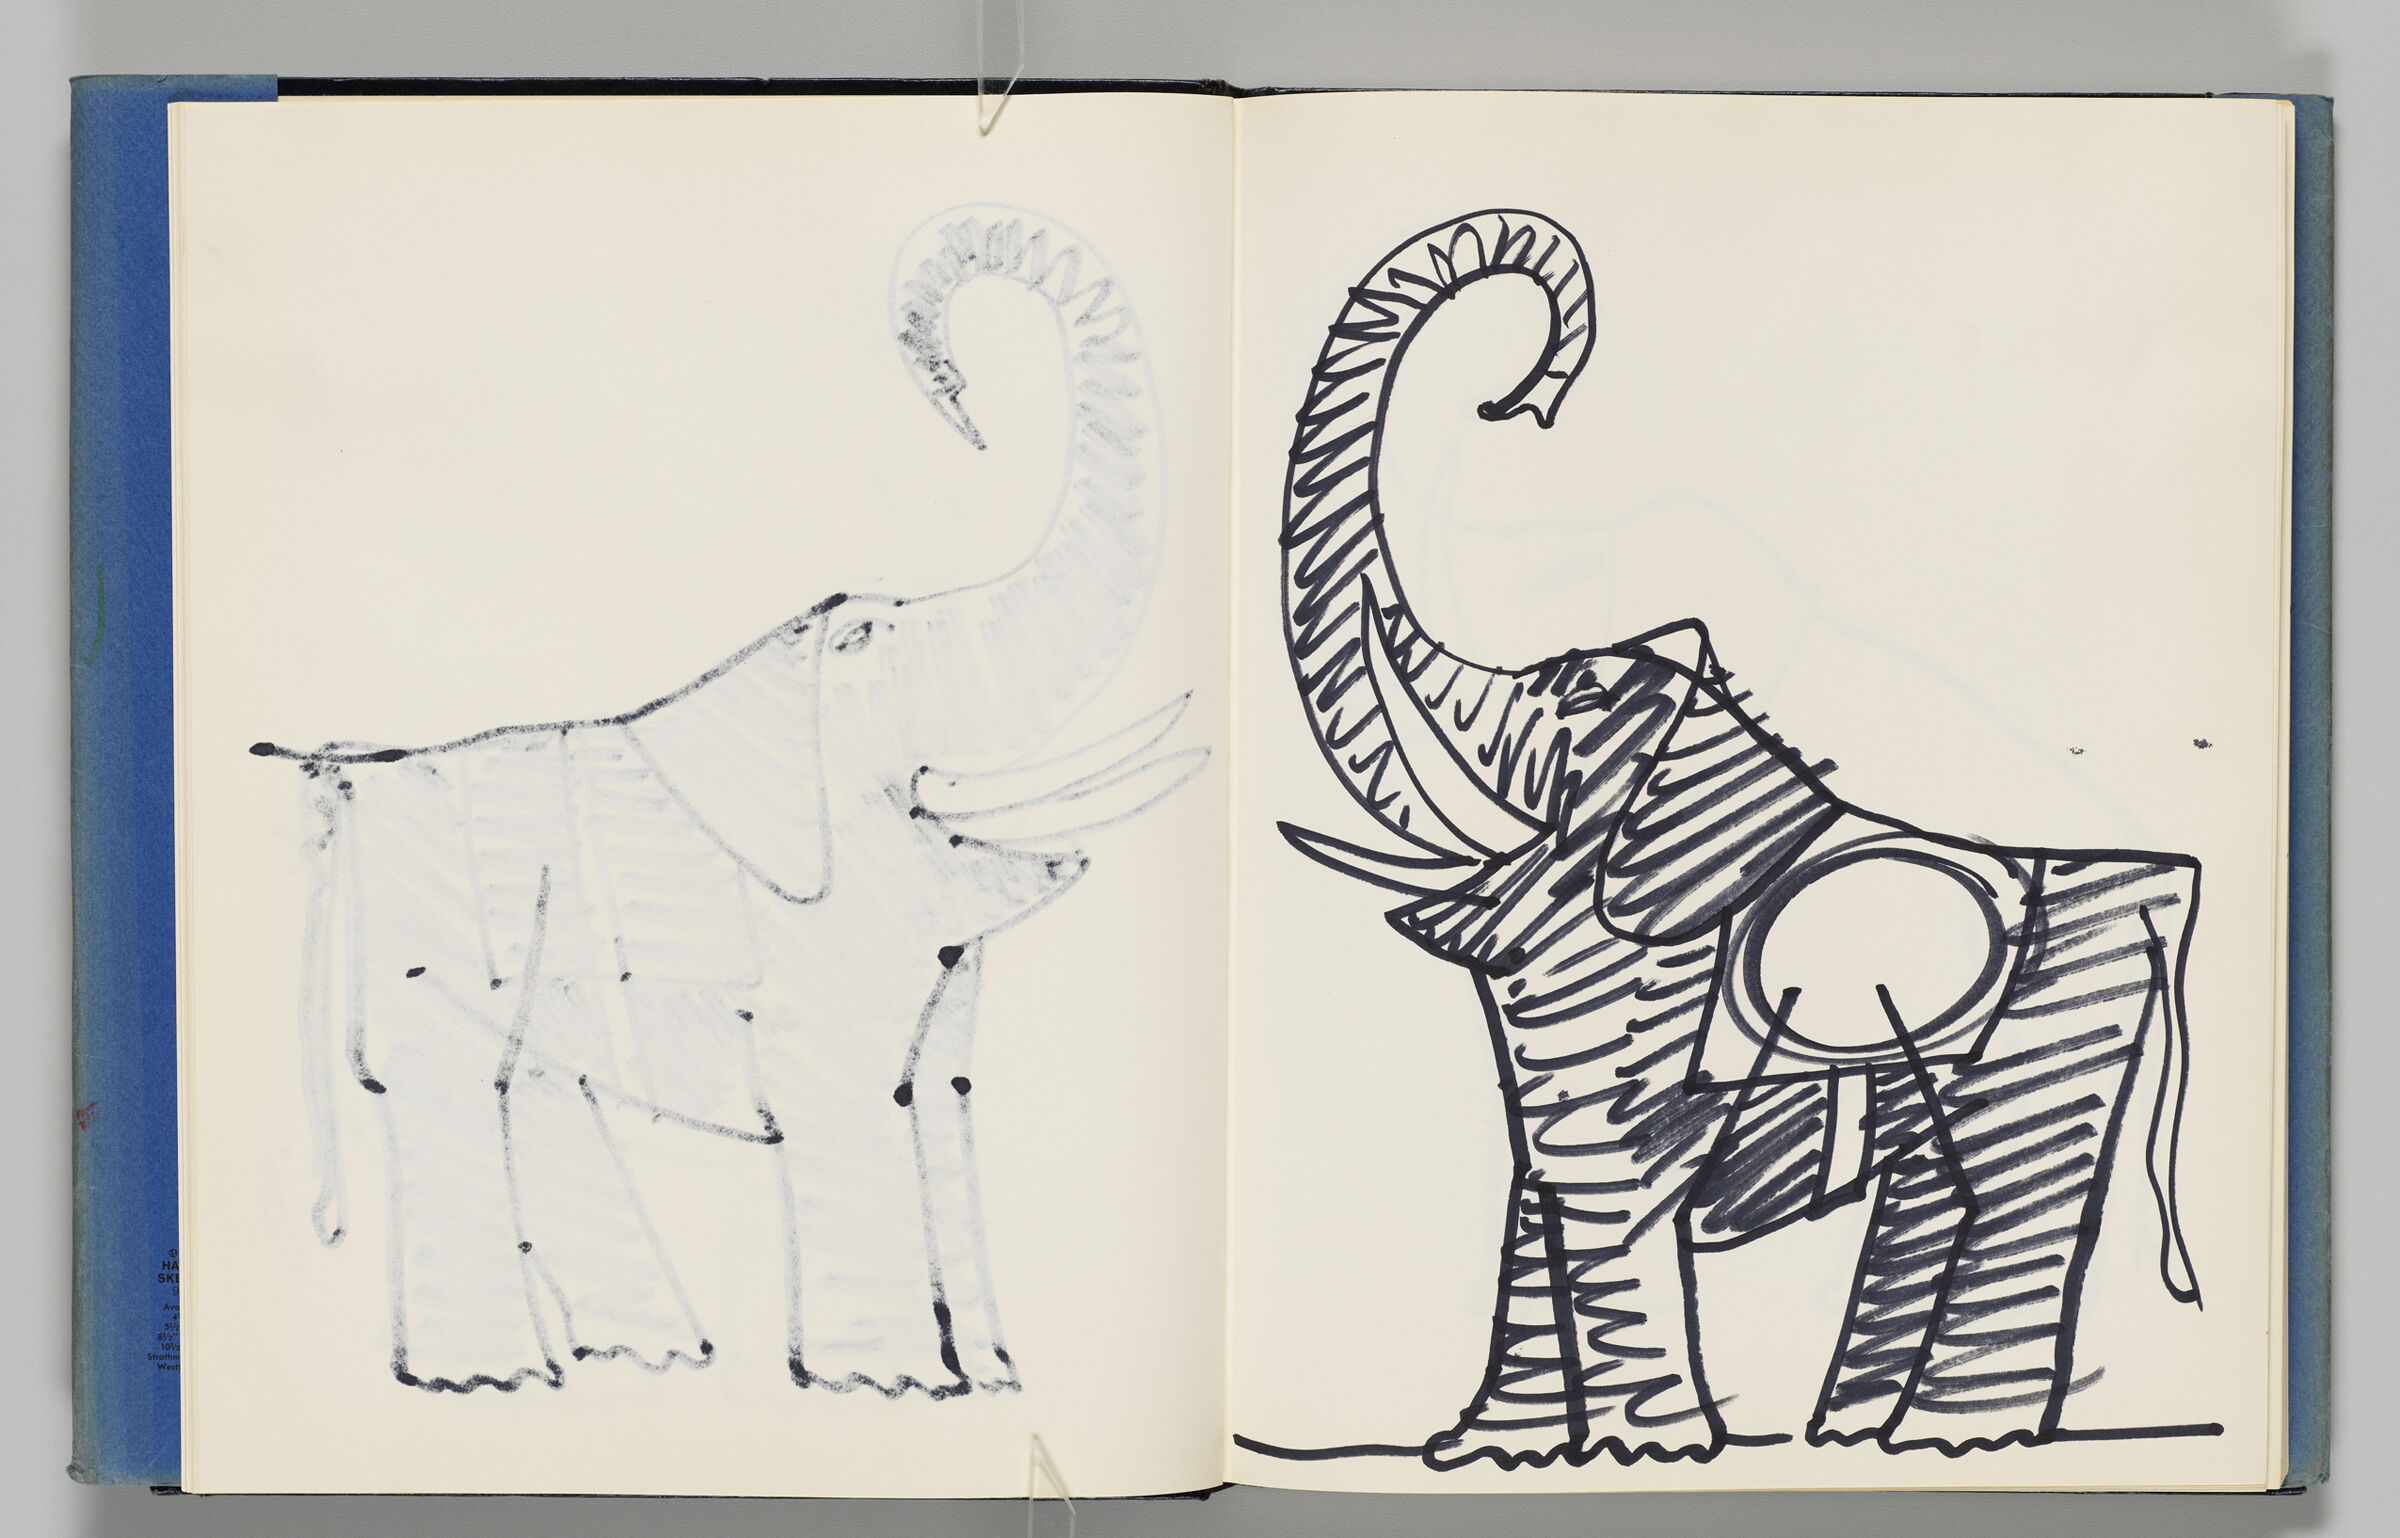 Untitled (Bleed-Through Of Previous Page, Left Page); Untitled (Elephant, Right Page)